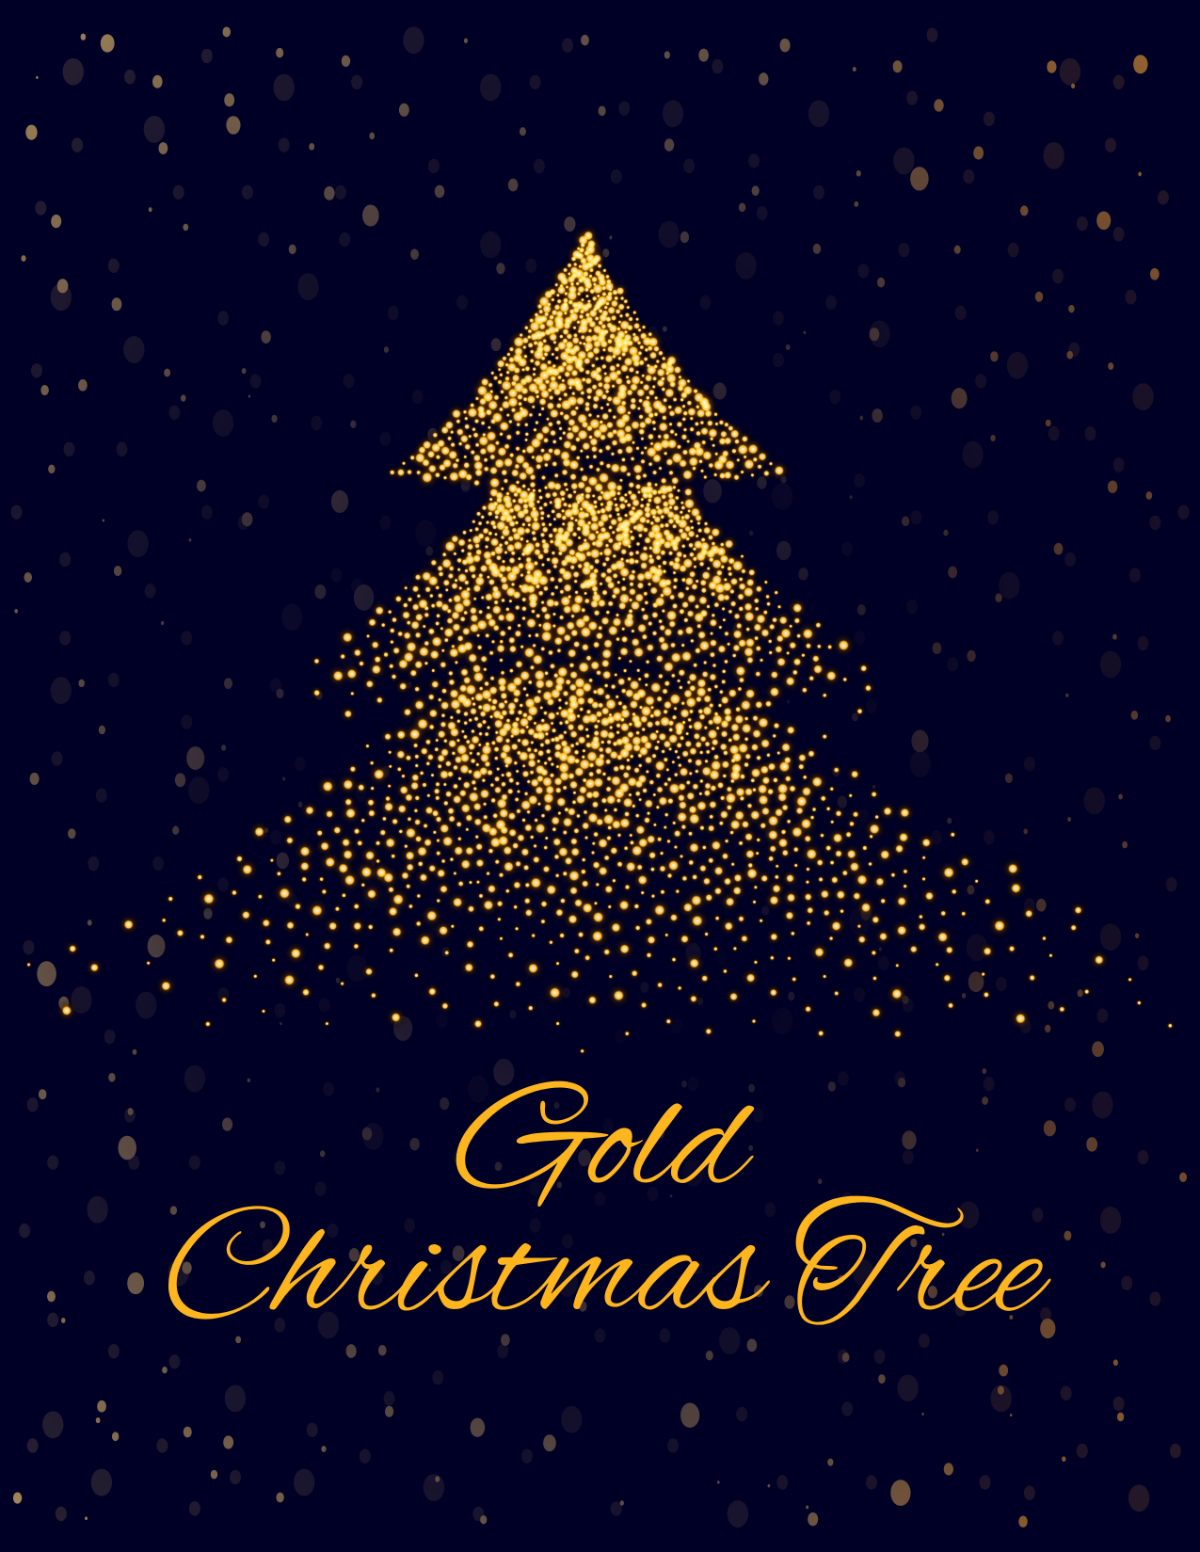 Free Gold Christmas Tree Template